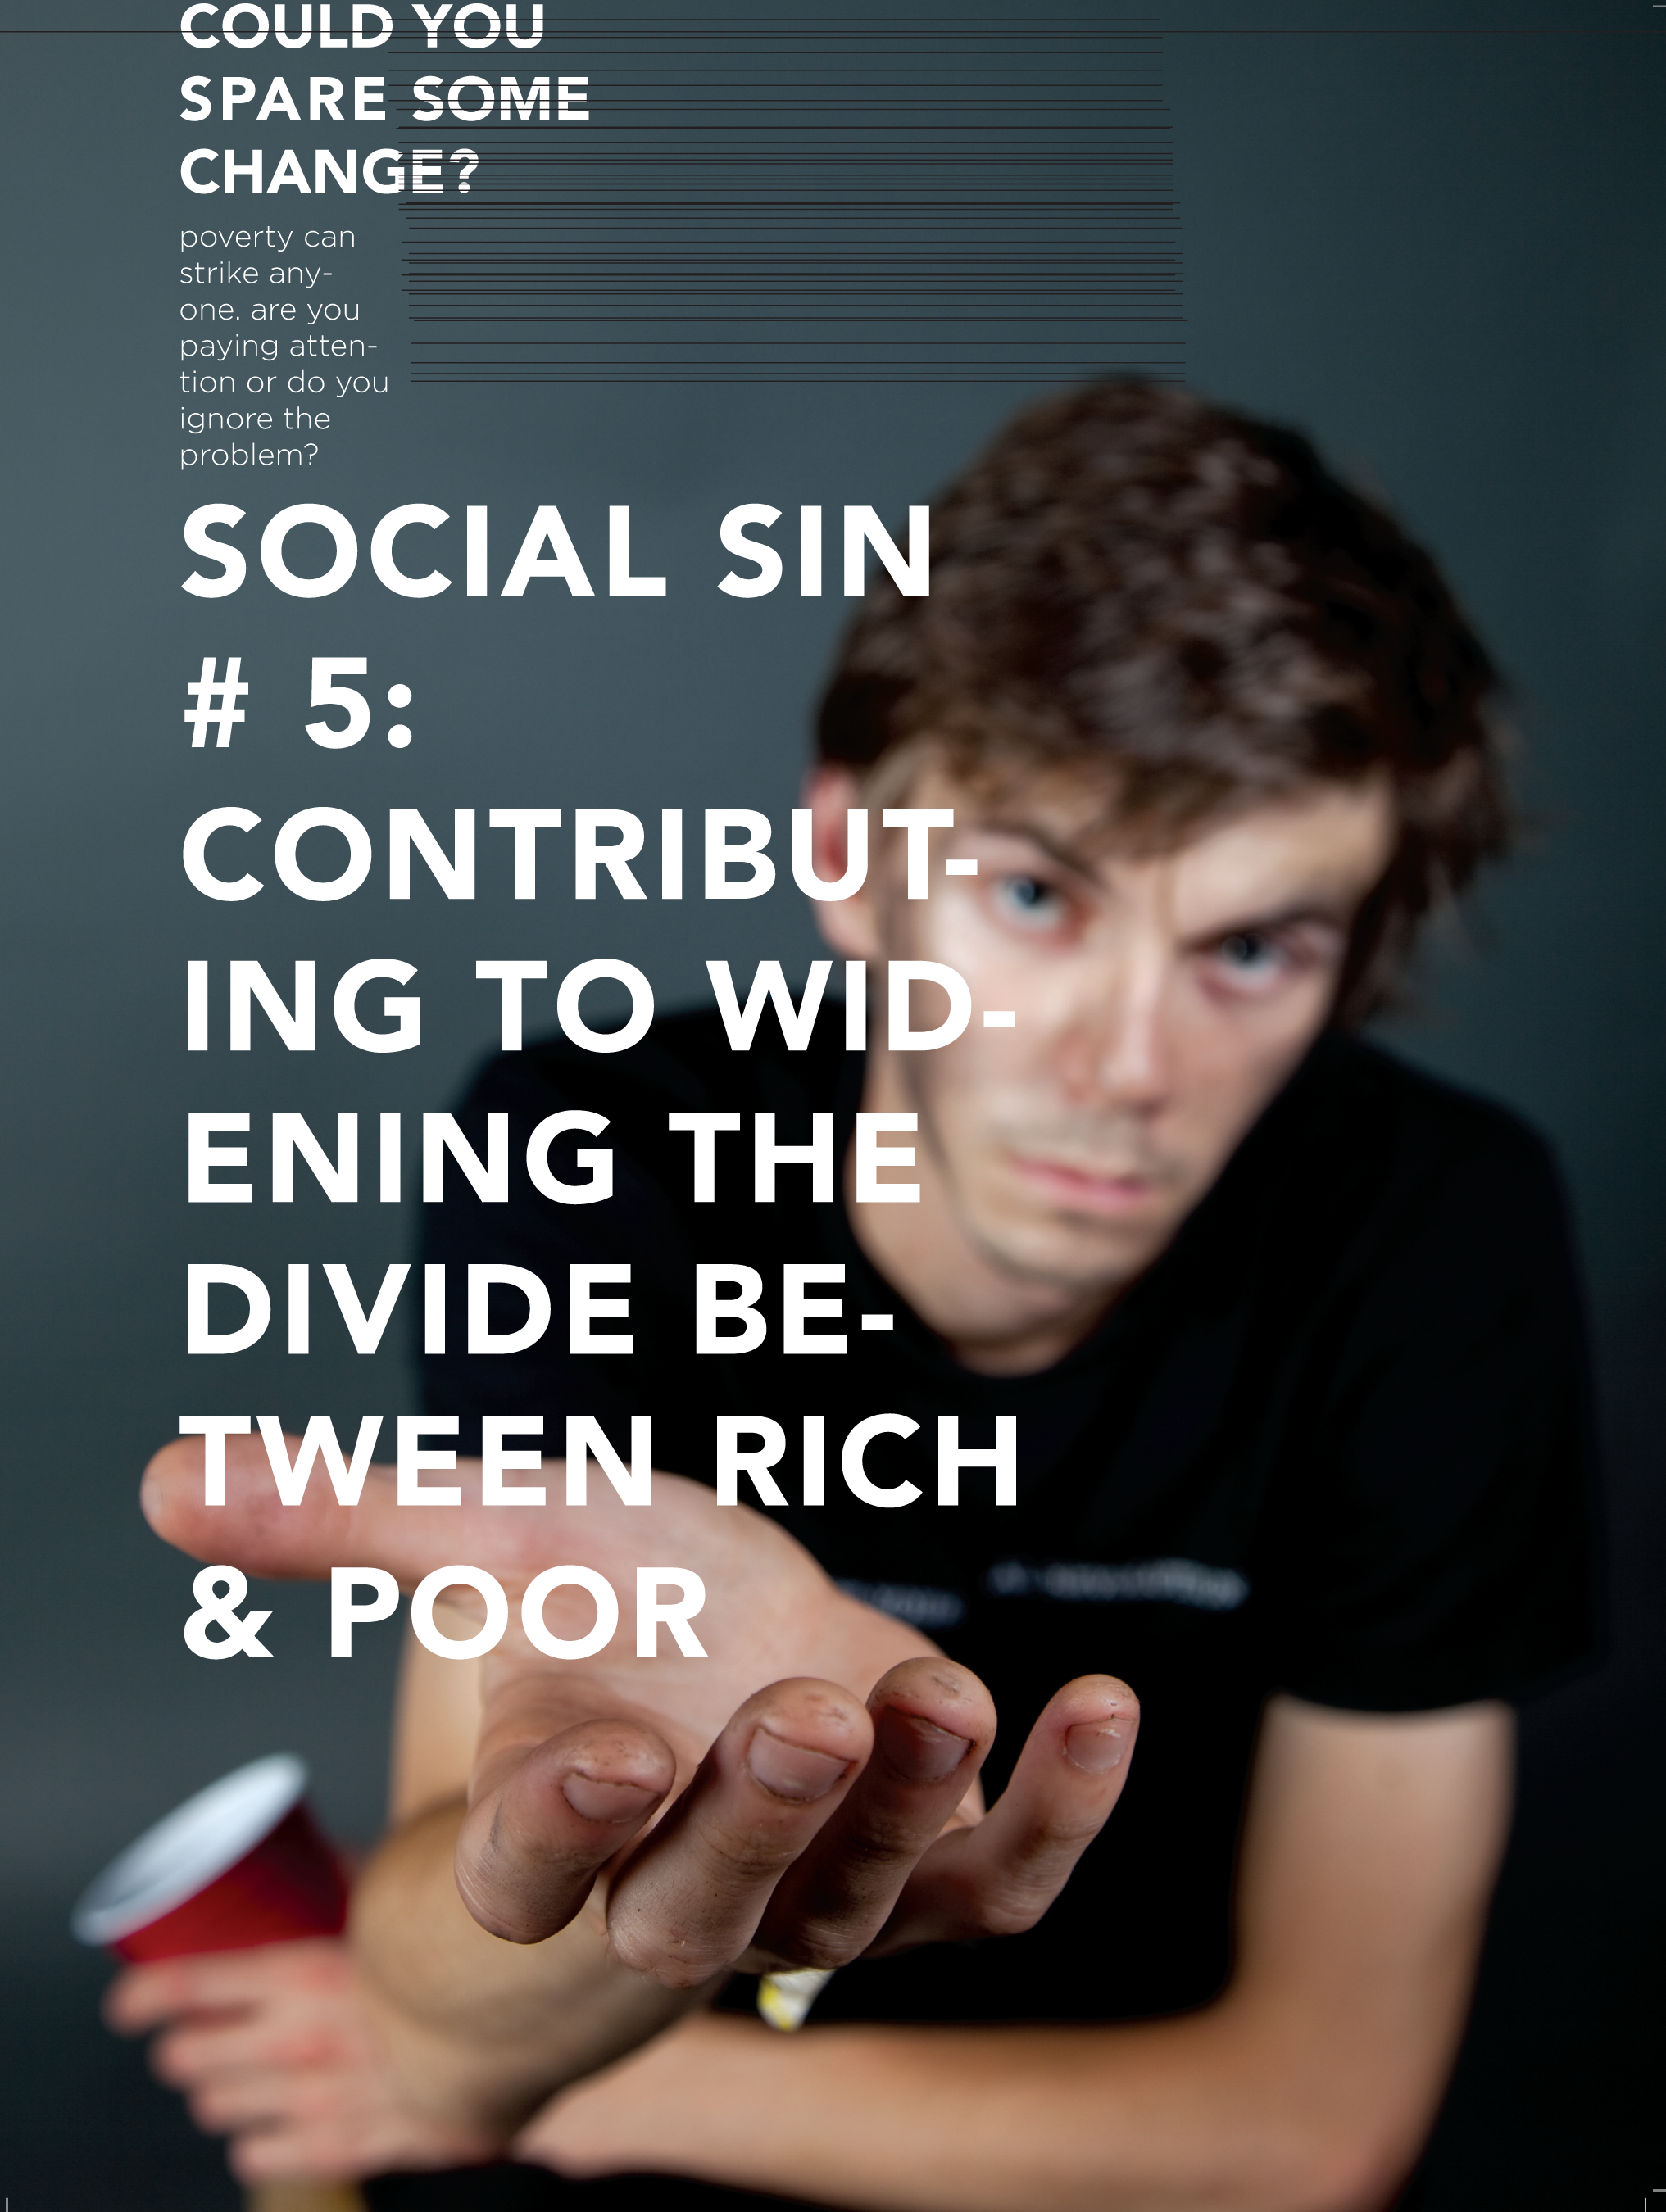 Social Sin #5 Contributing to Widening the Divide